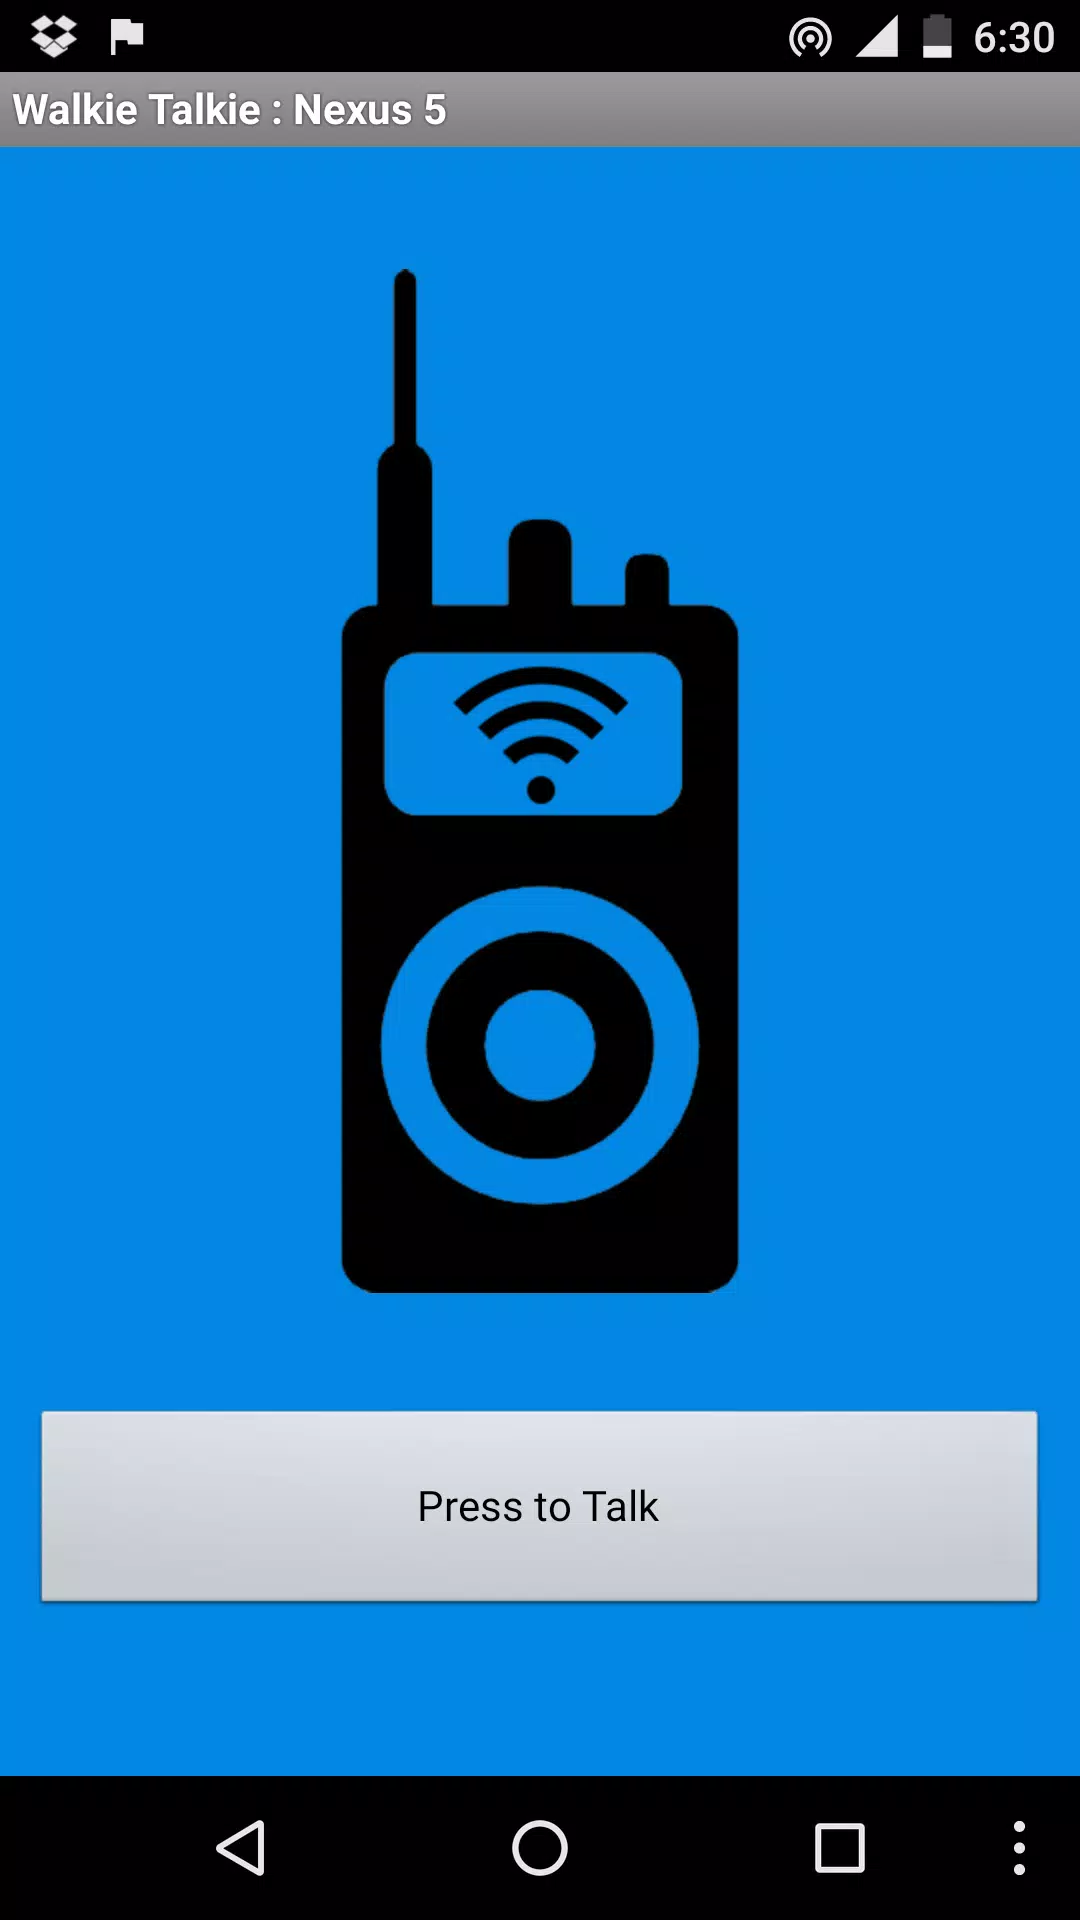 WiFi Walkie Talkie for Android - APK Download